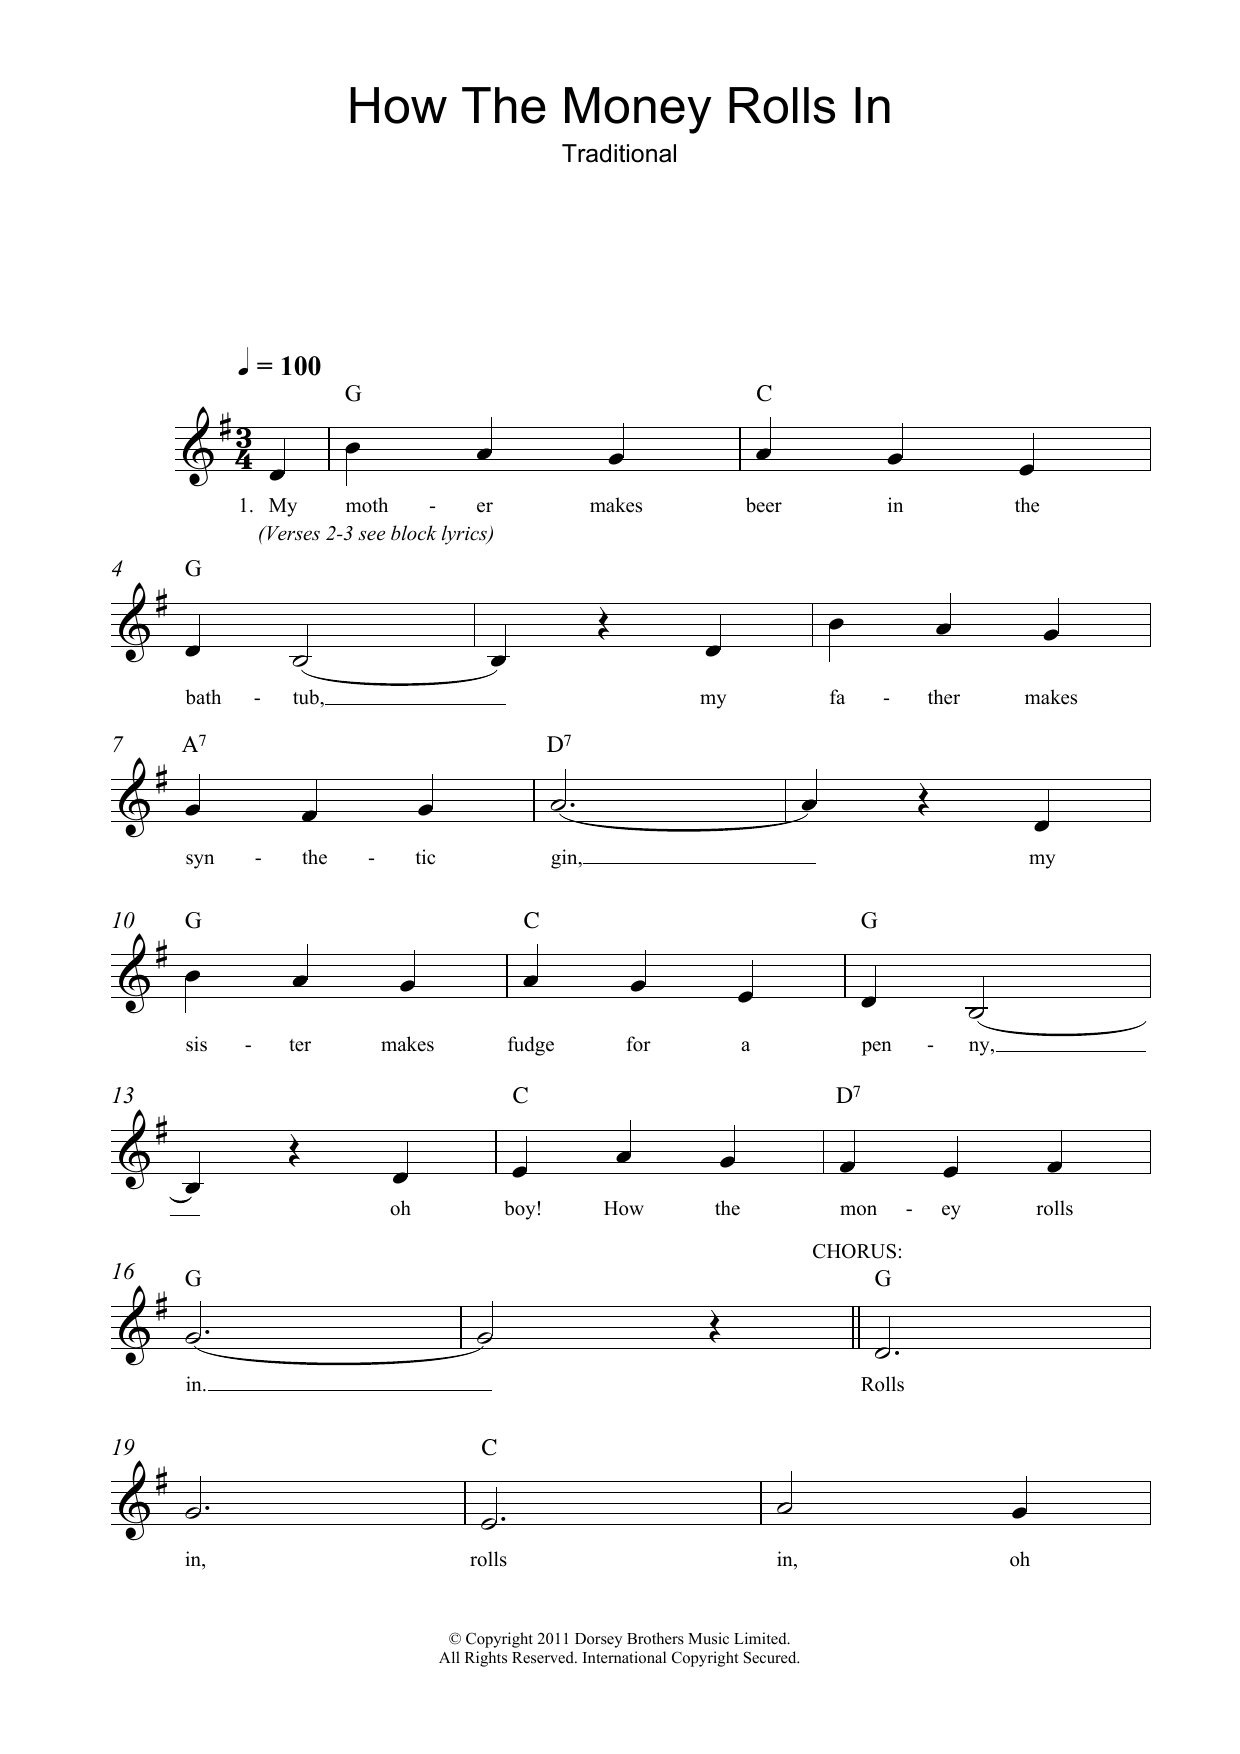 Download Traditional How The Money Rolls In Sheet Music